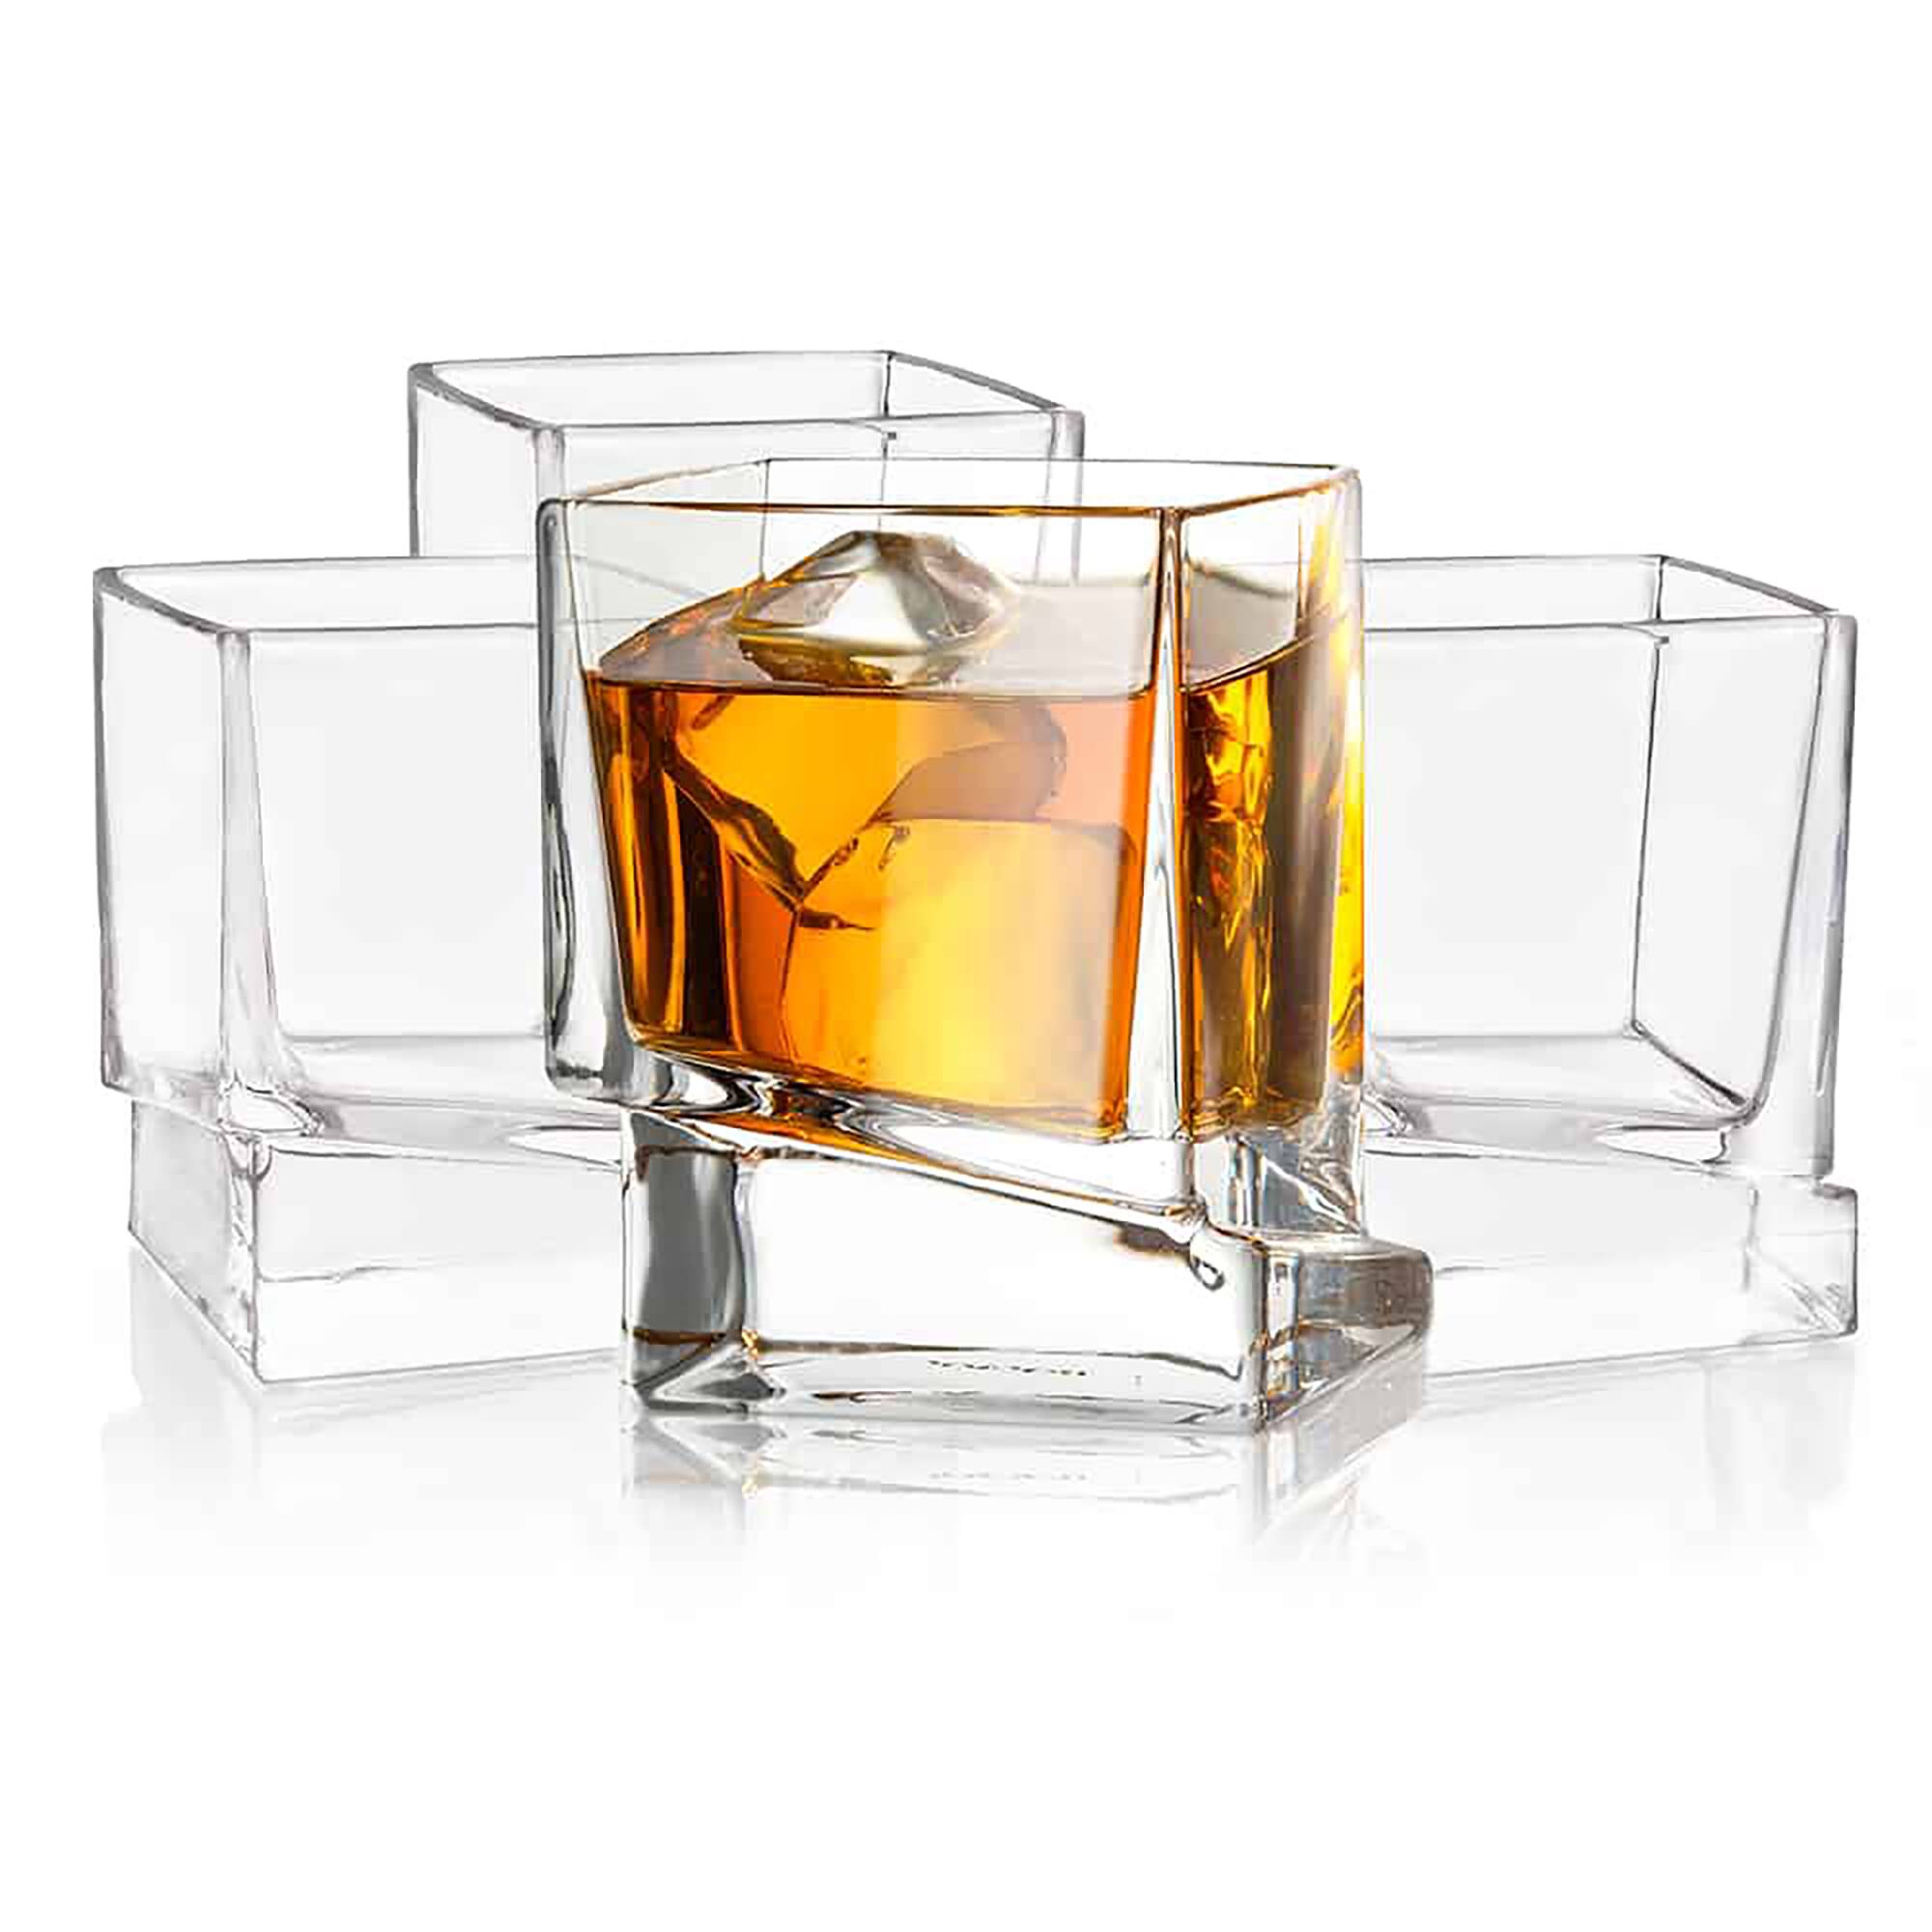 JoyJolt Carre Square Scotch Glasses, Old Fashioned Whiskey Glasses  10-Ounce, Ultra Clear Whiskey Gla…See more JoyJolt Carre Square Scotch  Glasses, Old